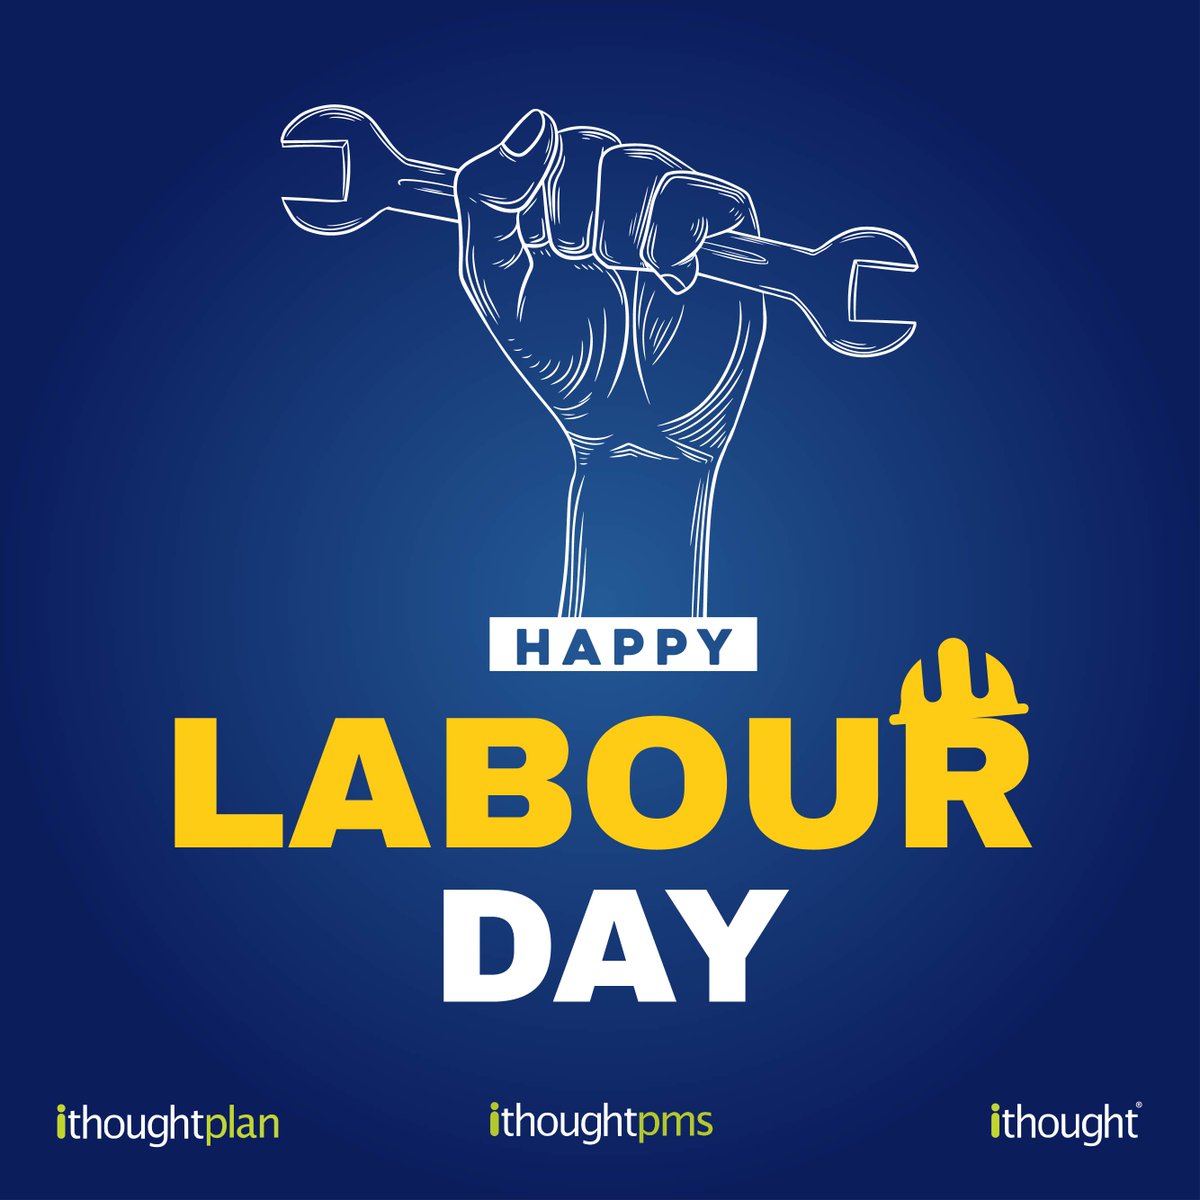 Happy Labour Day to all hardworking people! #labourday #mayday #hardwork #may1 #ithoughtpms